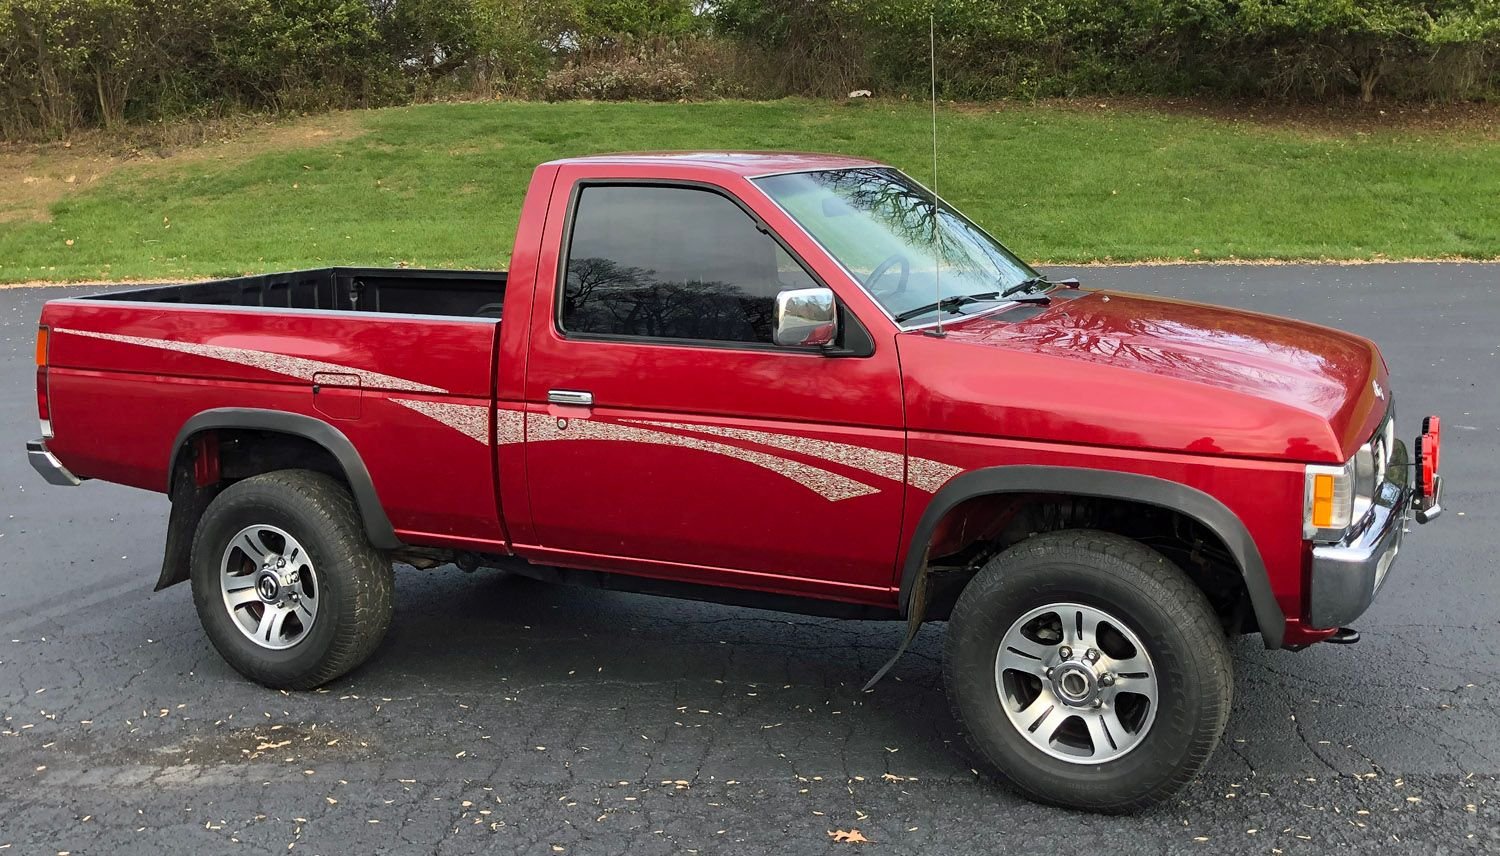 1997 Nissan XE Pick-up Truck